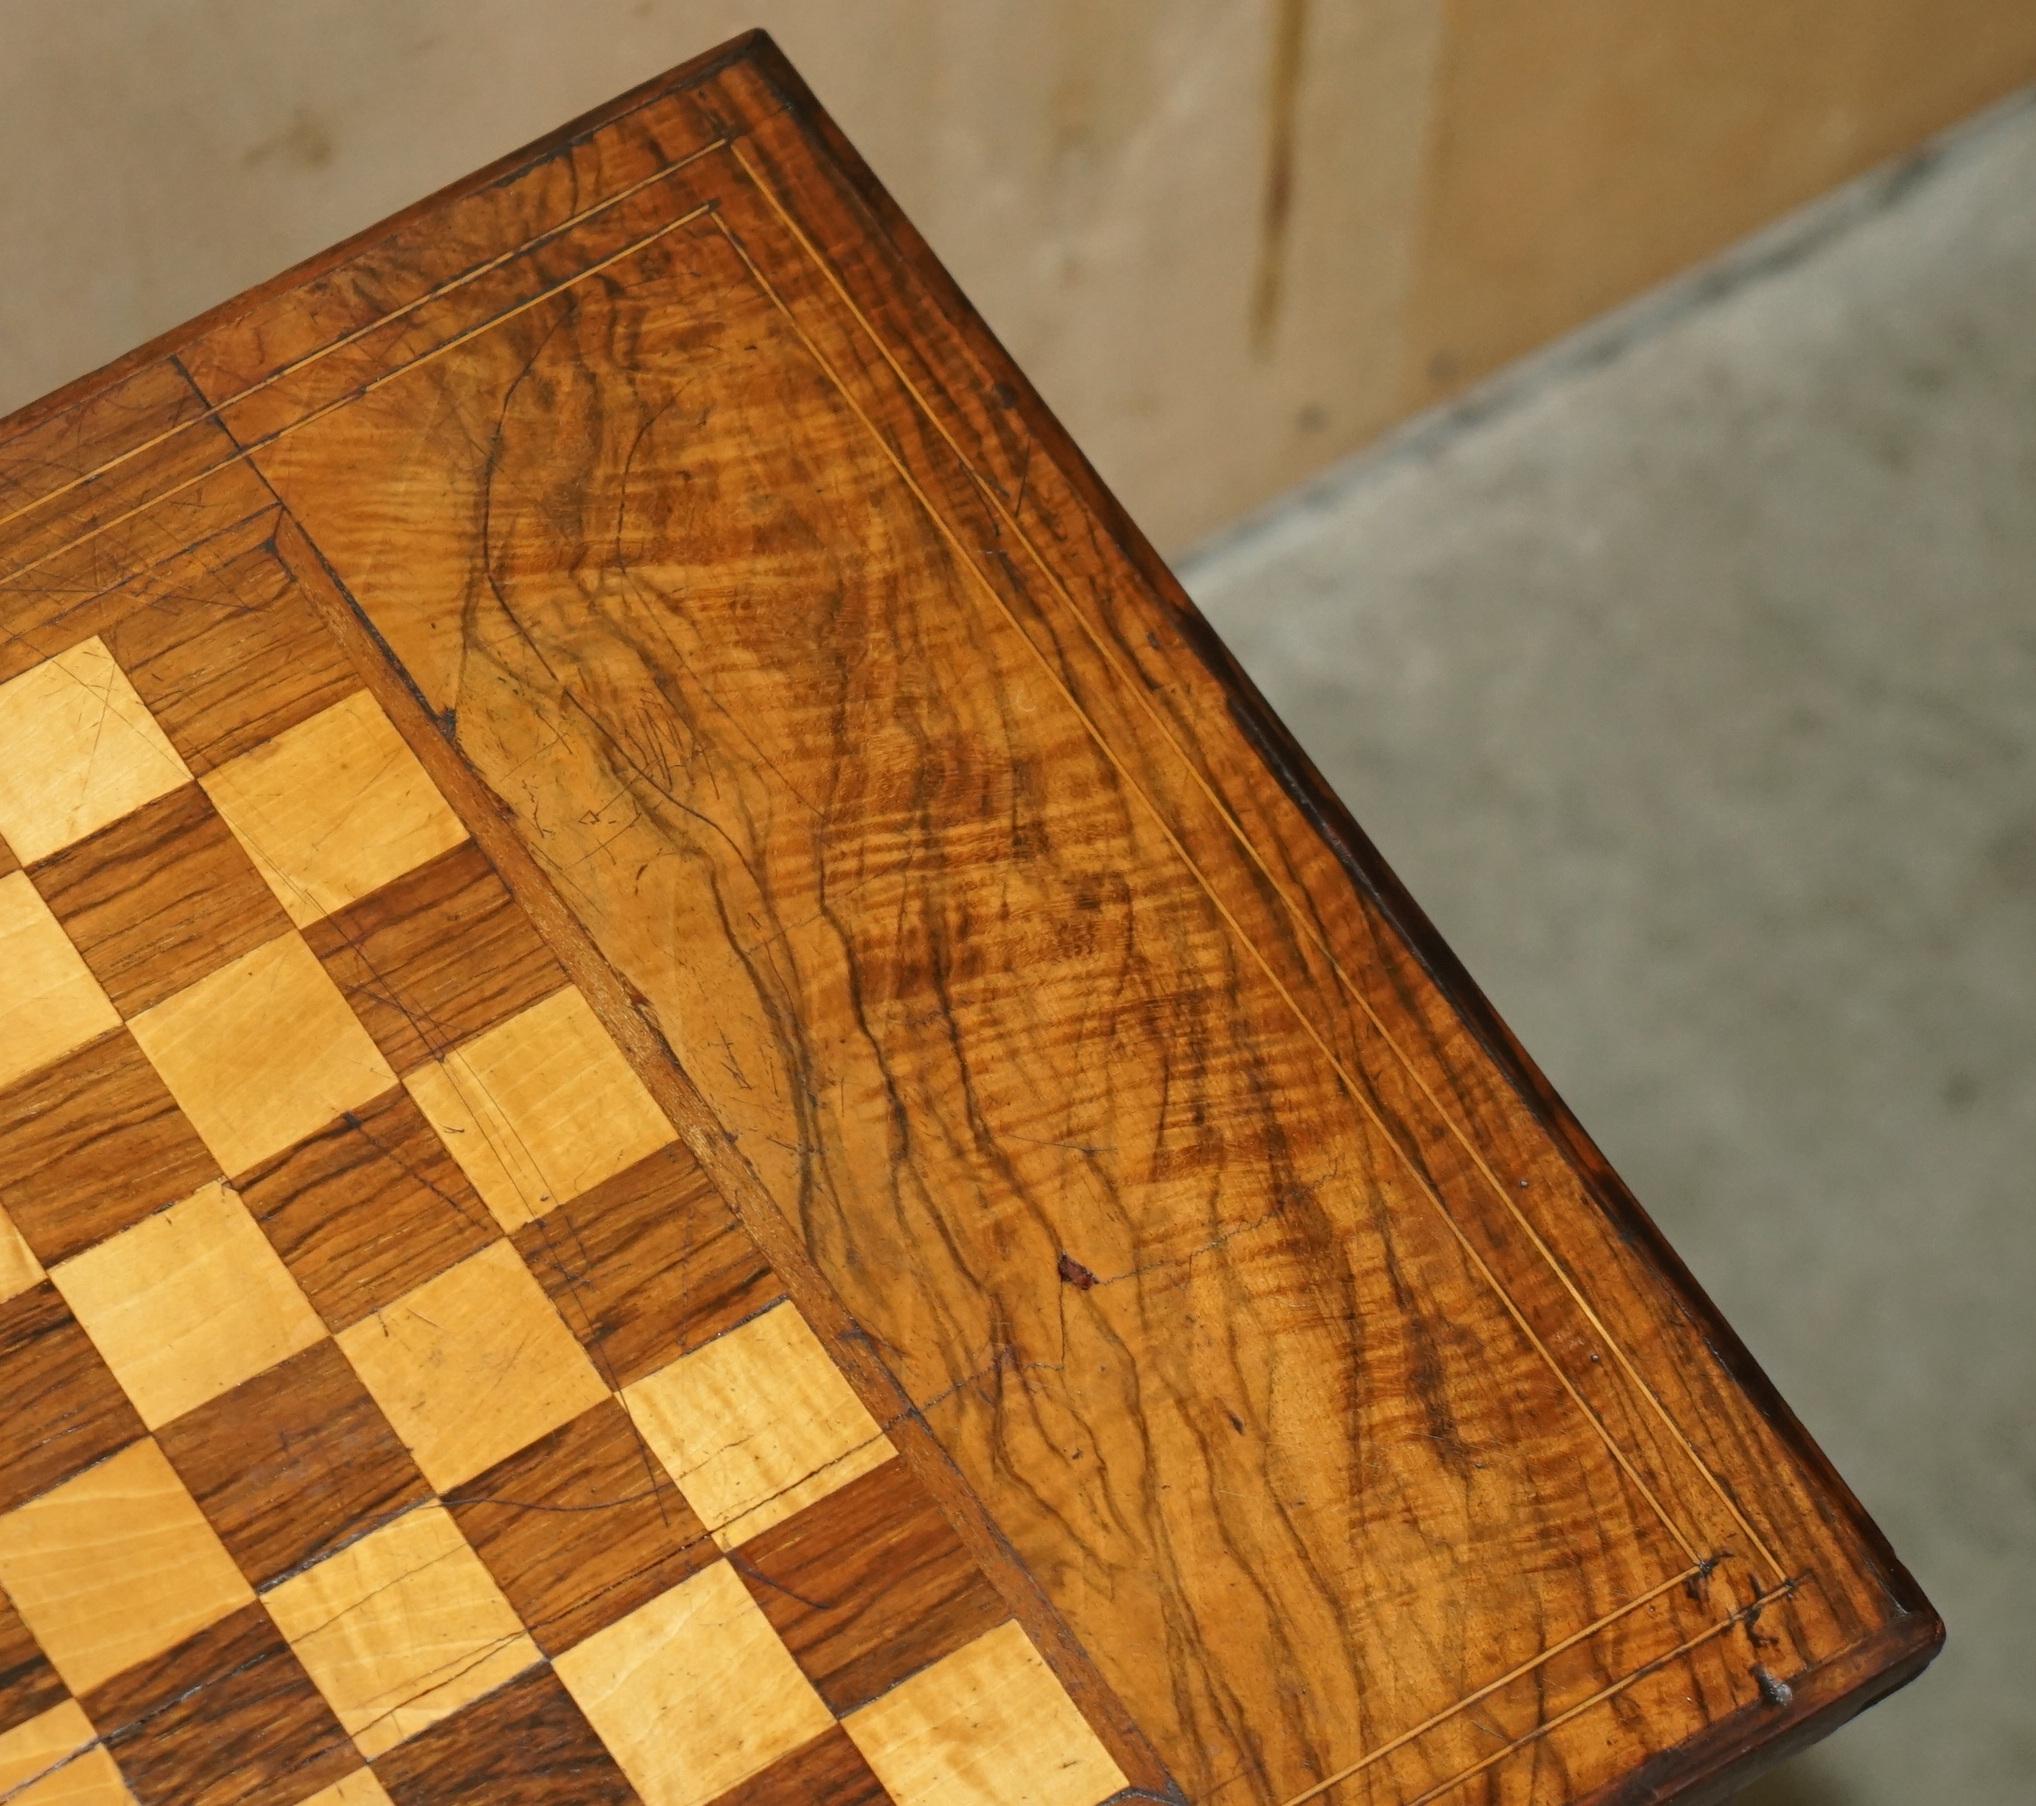 EXQUISITE WALNUT SATINWOOD & HARDWOOD ANTIQUE ViCTORIAN CHESSBOARD GAMES TABLE For Sale 1